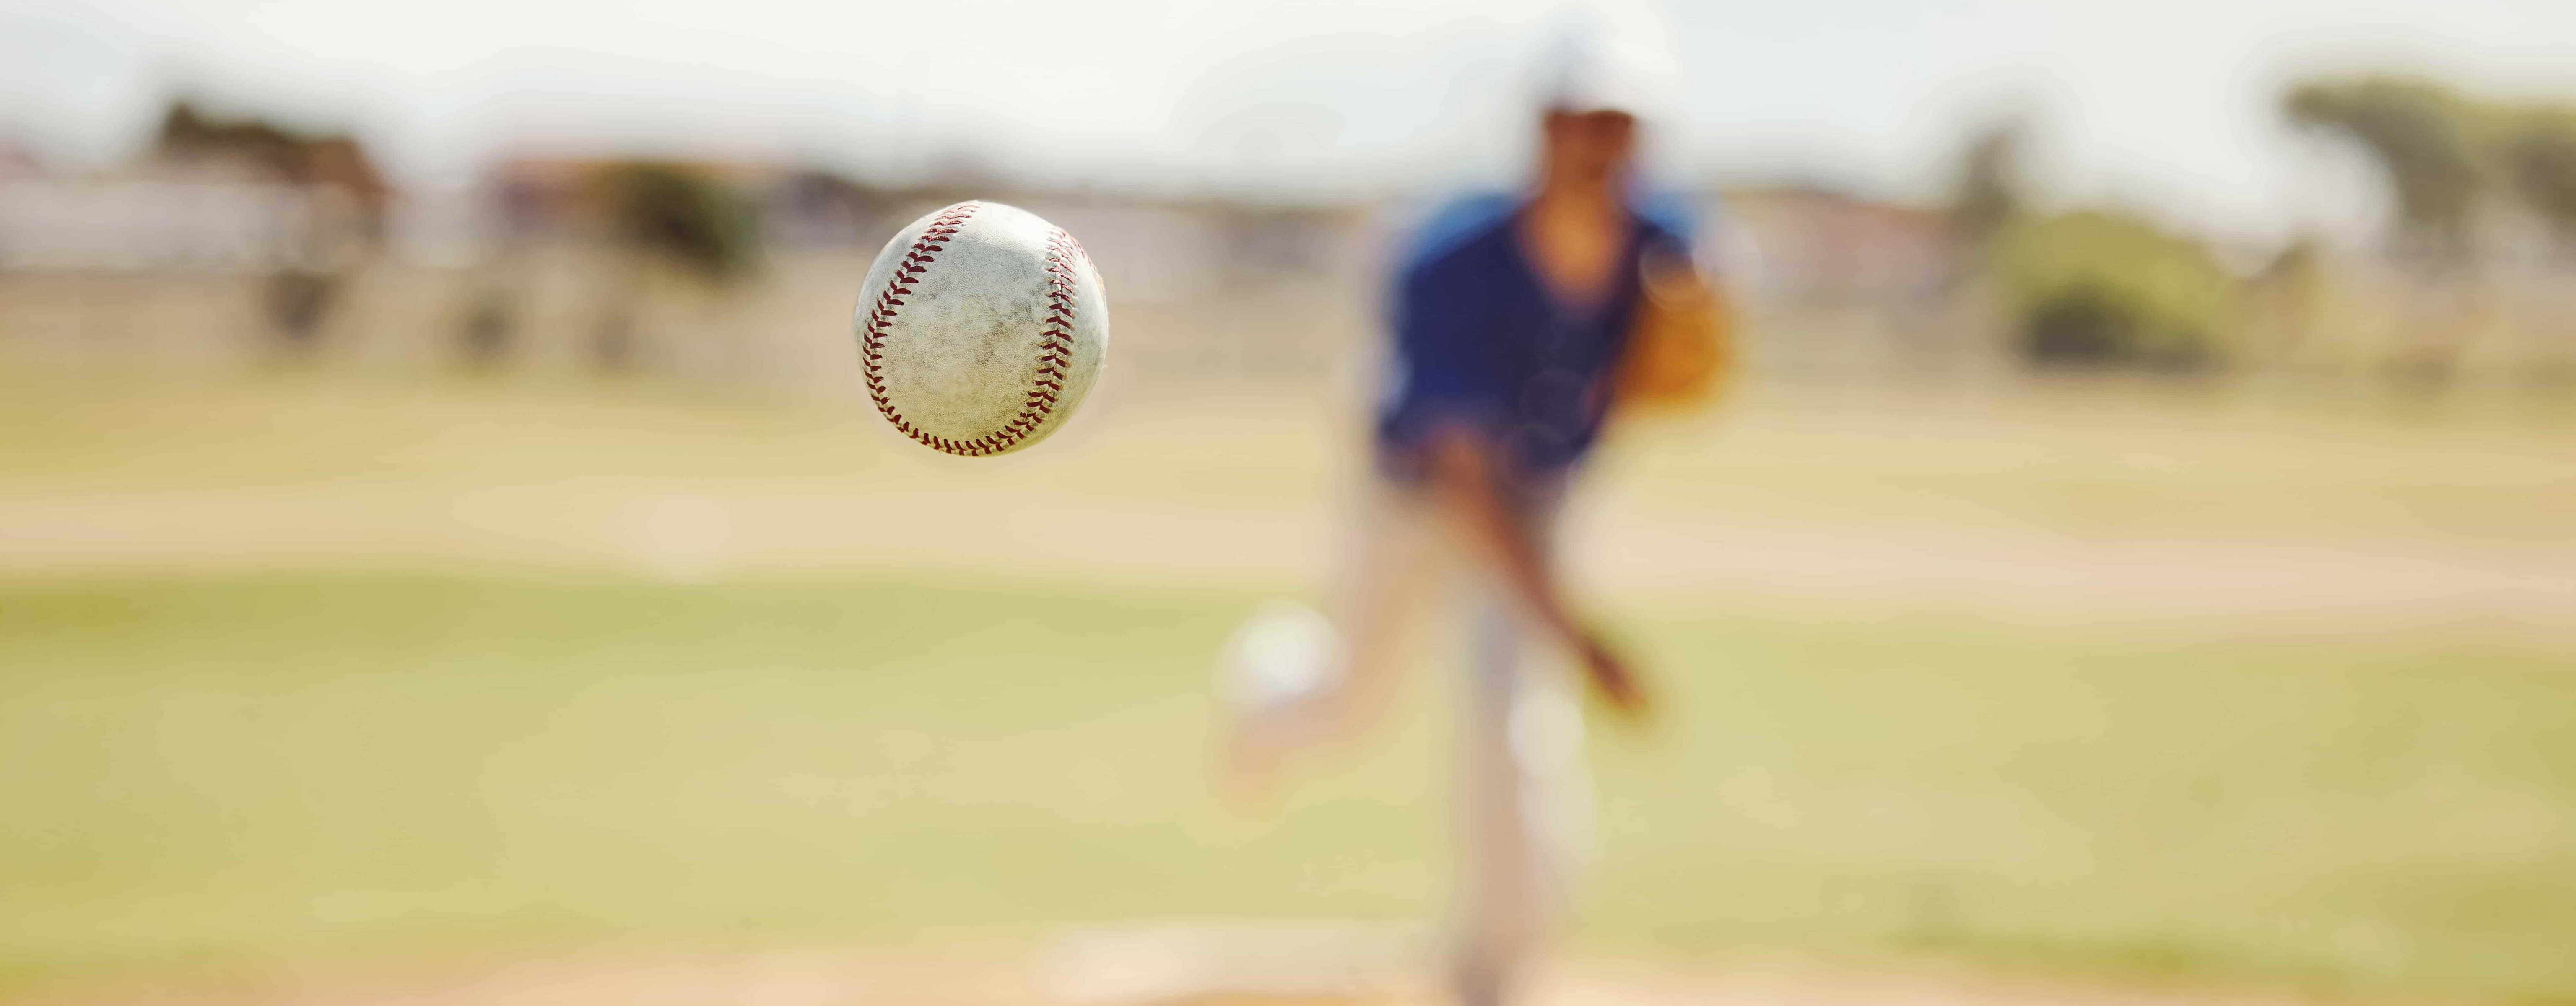 person out of focus throwing baseball that's in focus